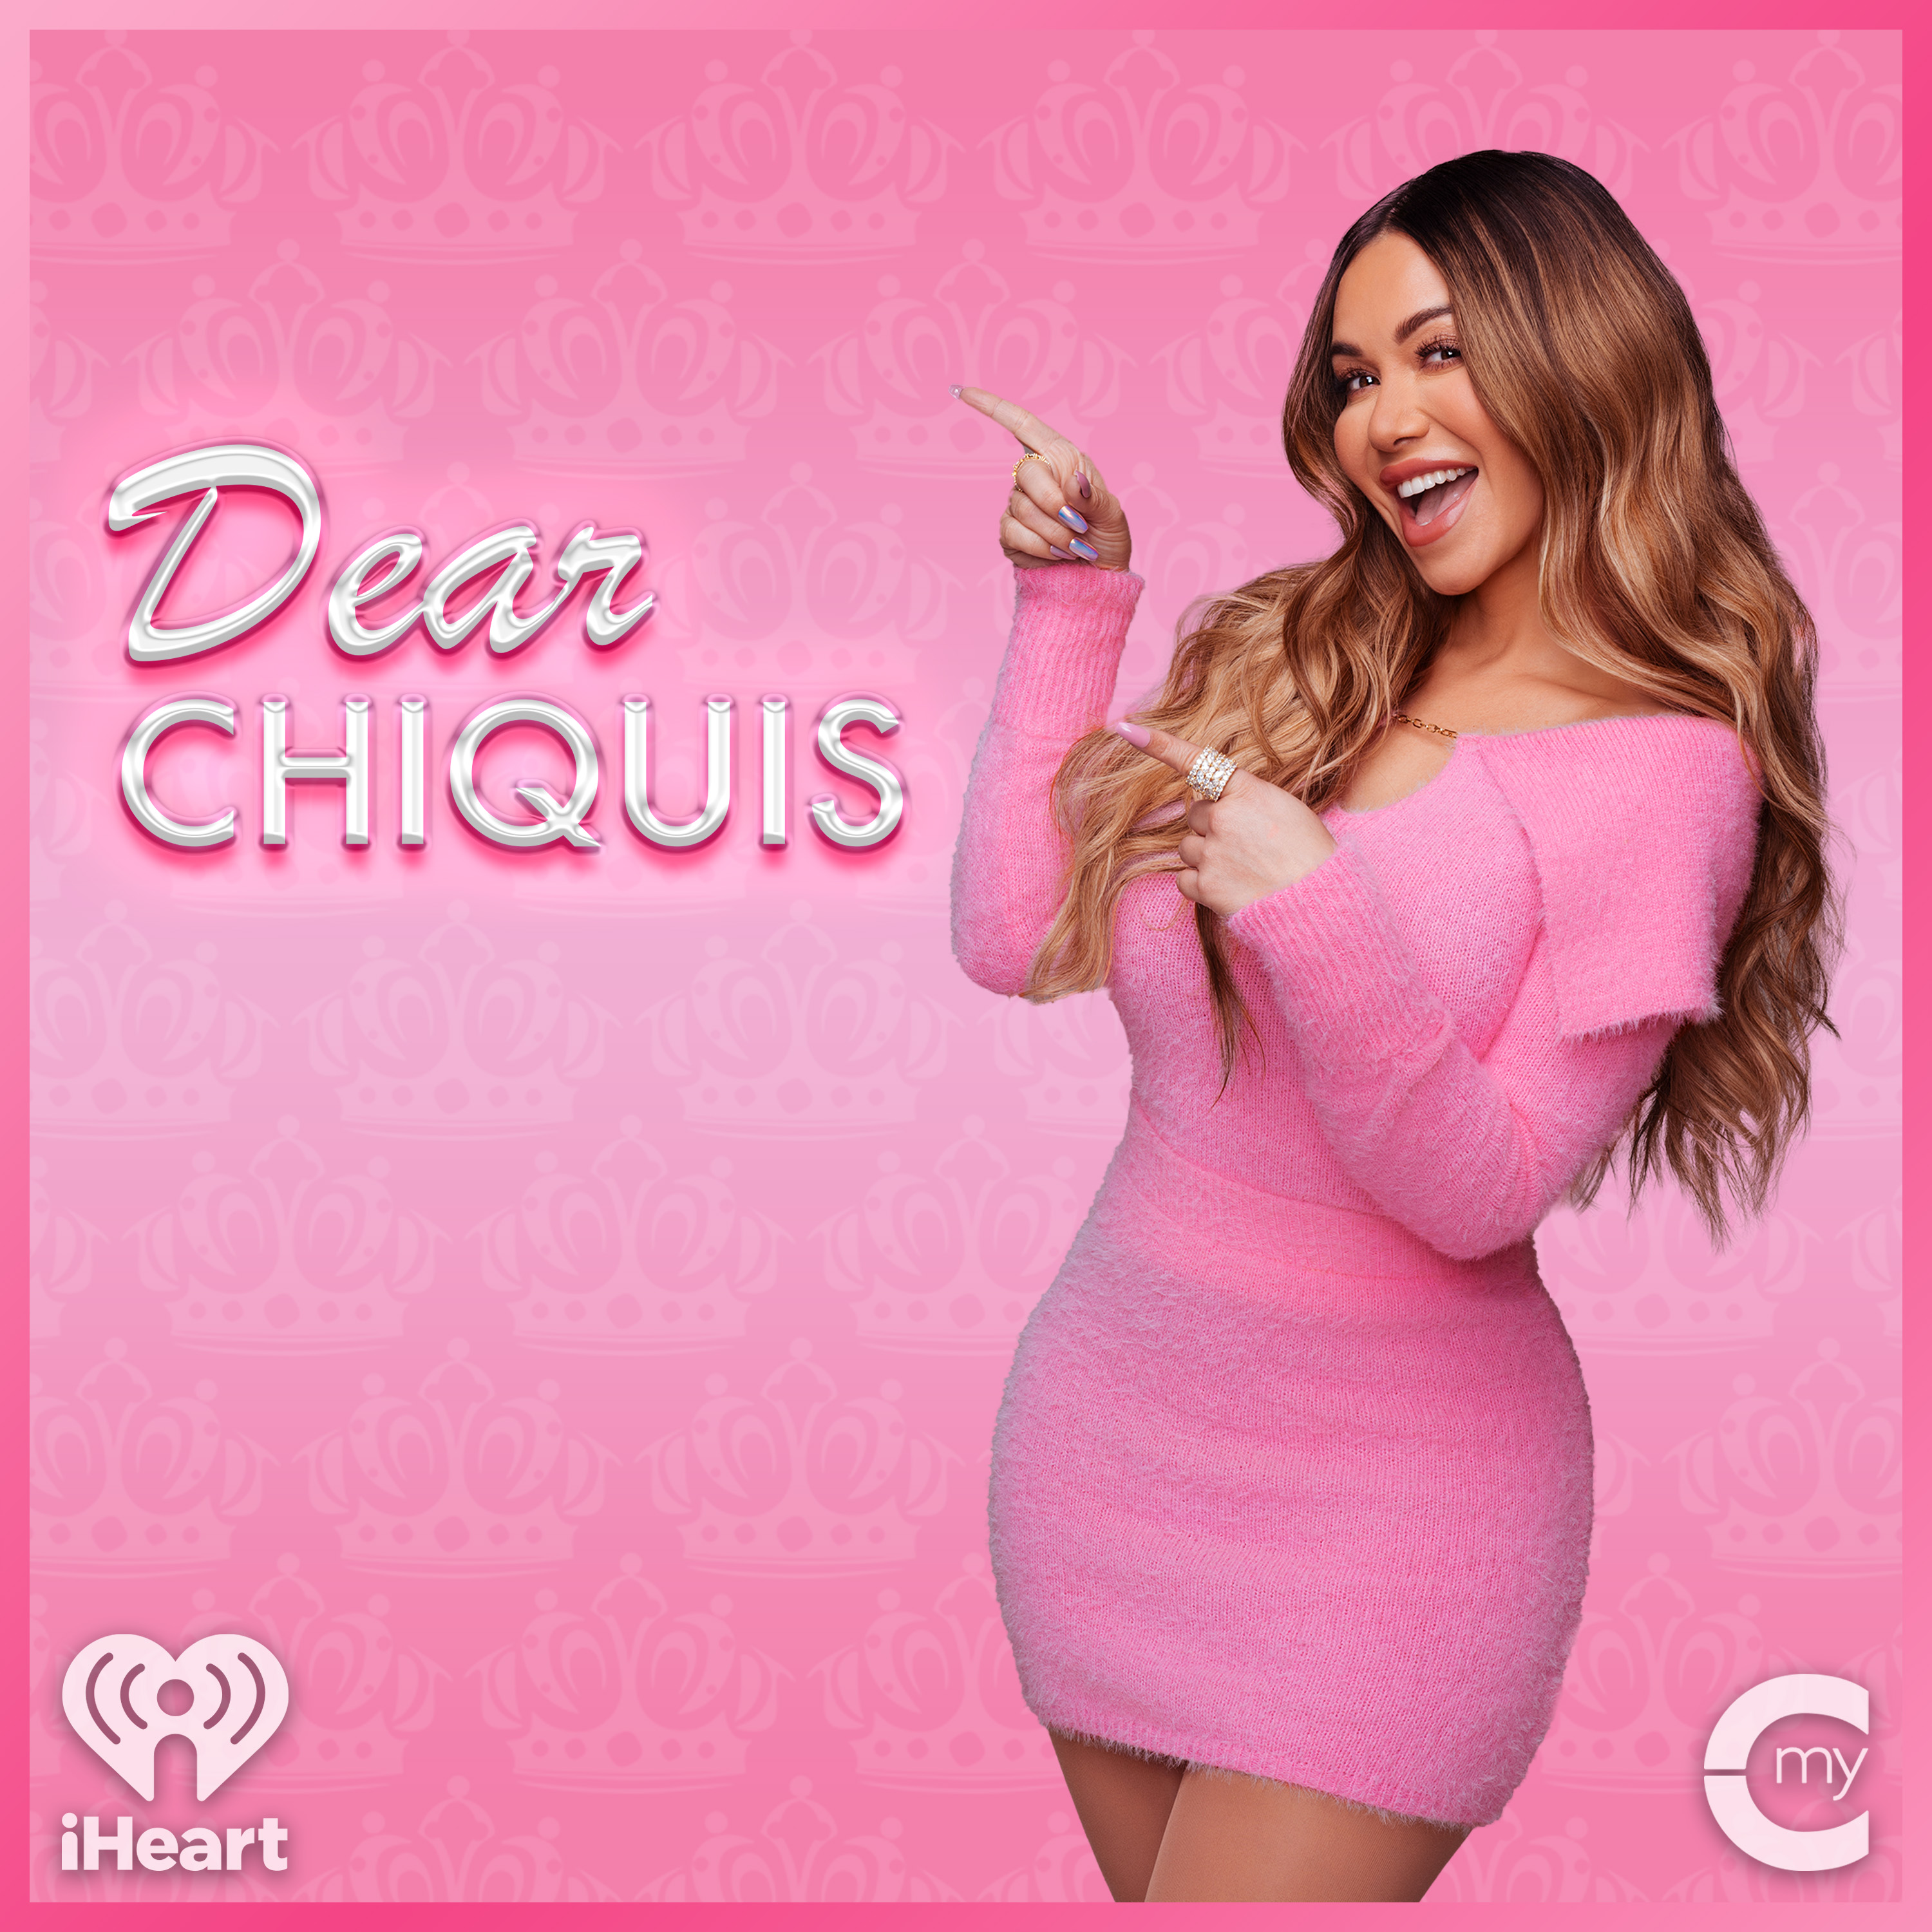 Dear Chiquis: Tips for Cosmetic Surgery, Staying Motivated to Work Out and Keeping a Positive Attitude